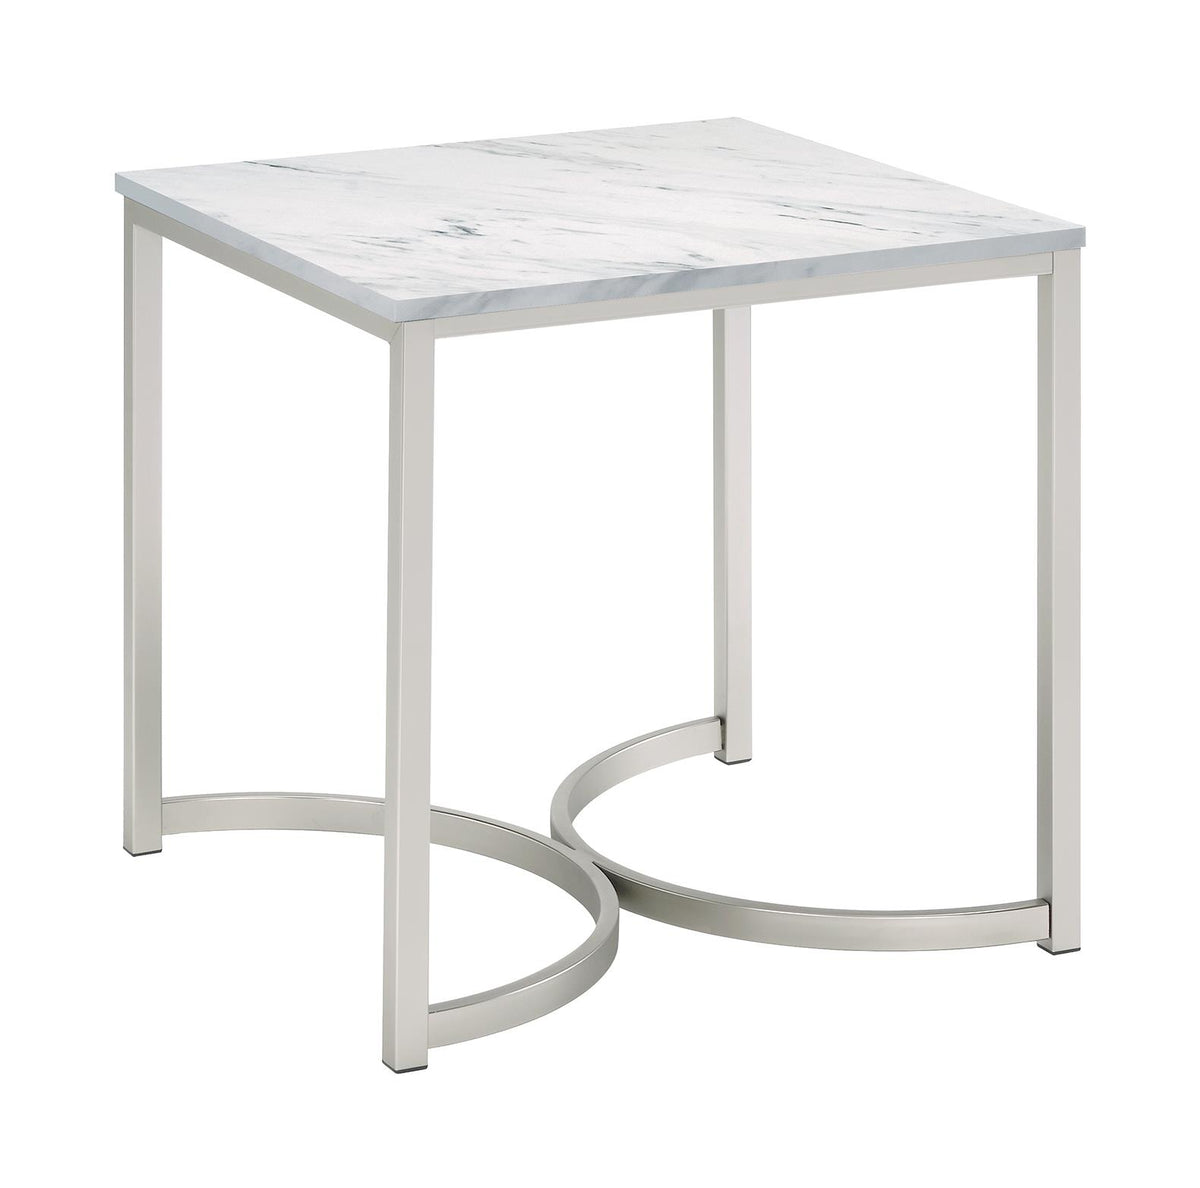 Leona Faux Marble Square End Table White and Satin Nickel  Half Price Furniture